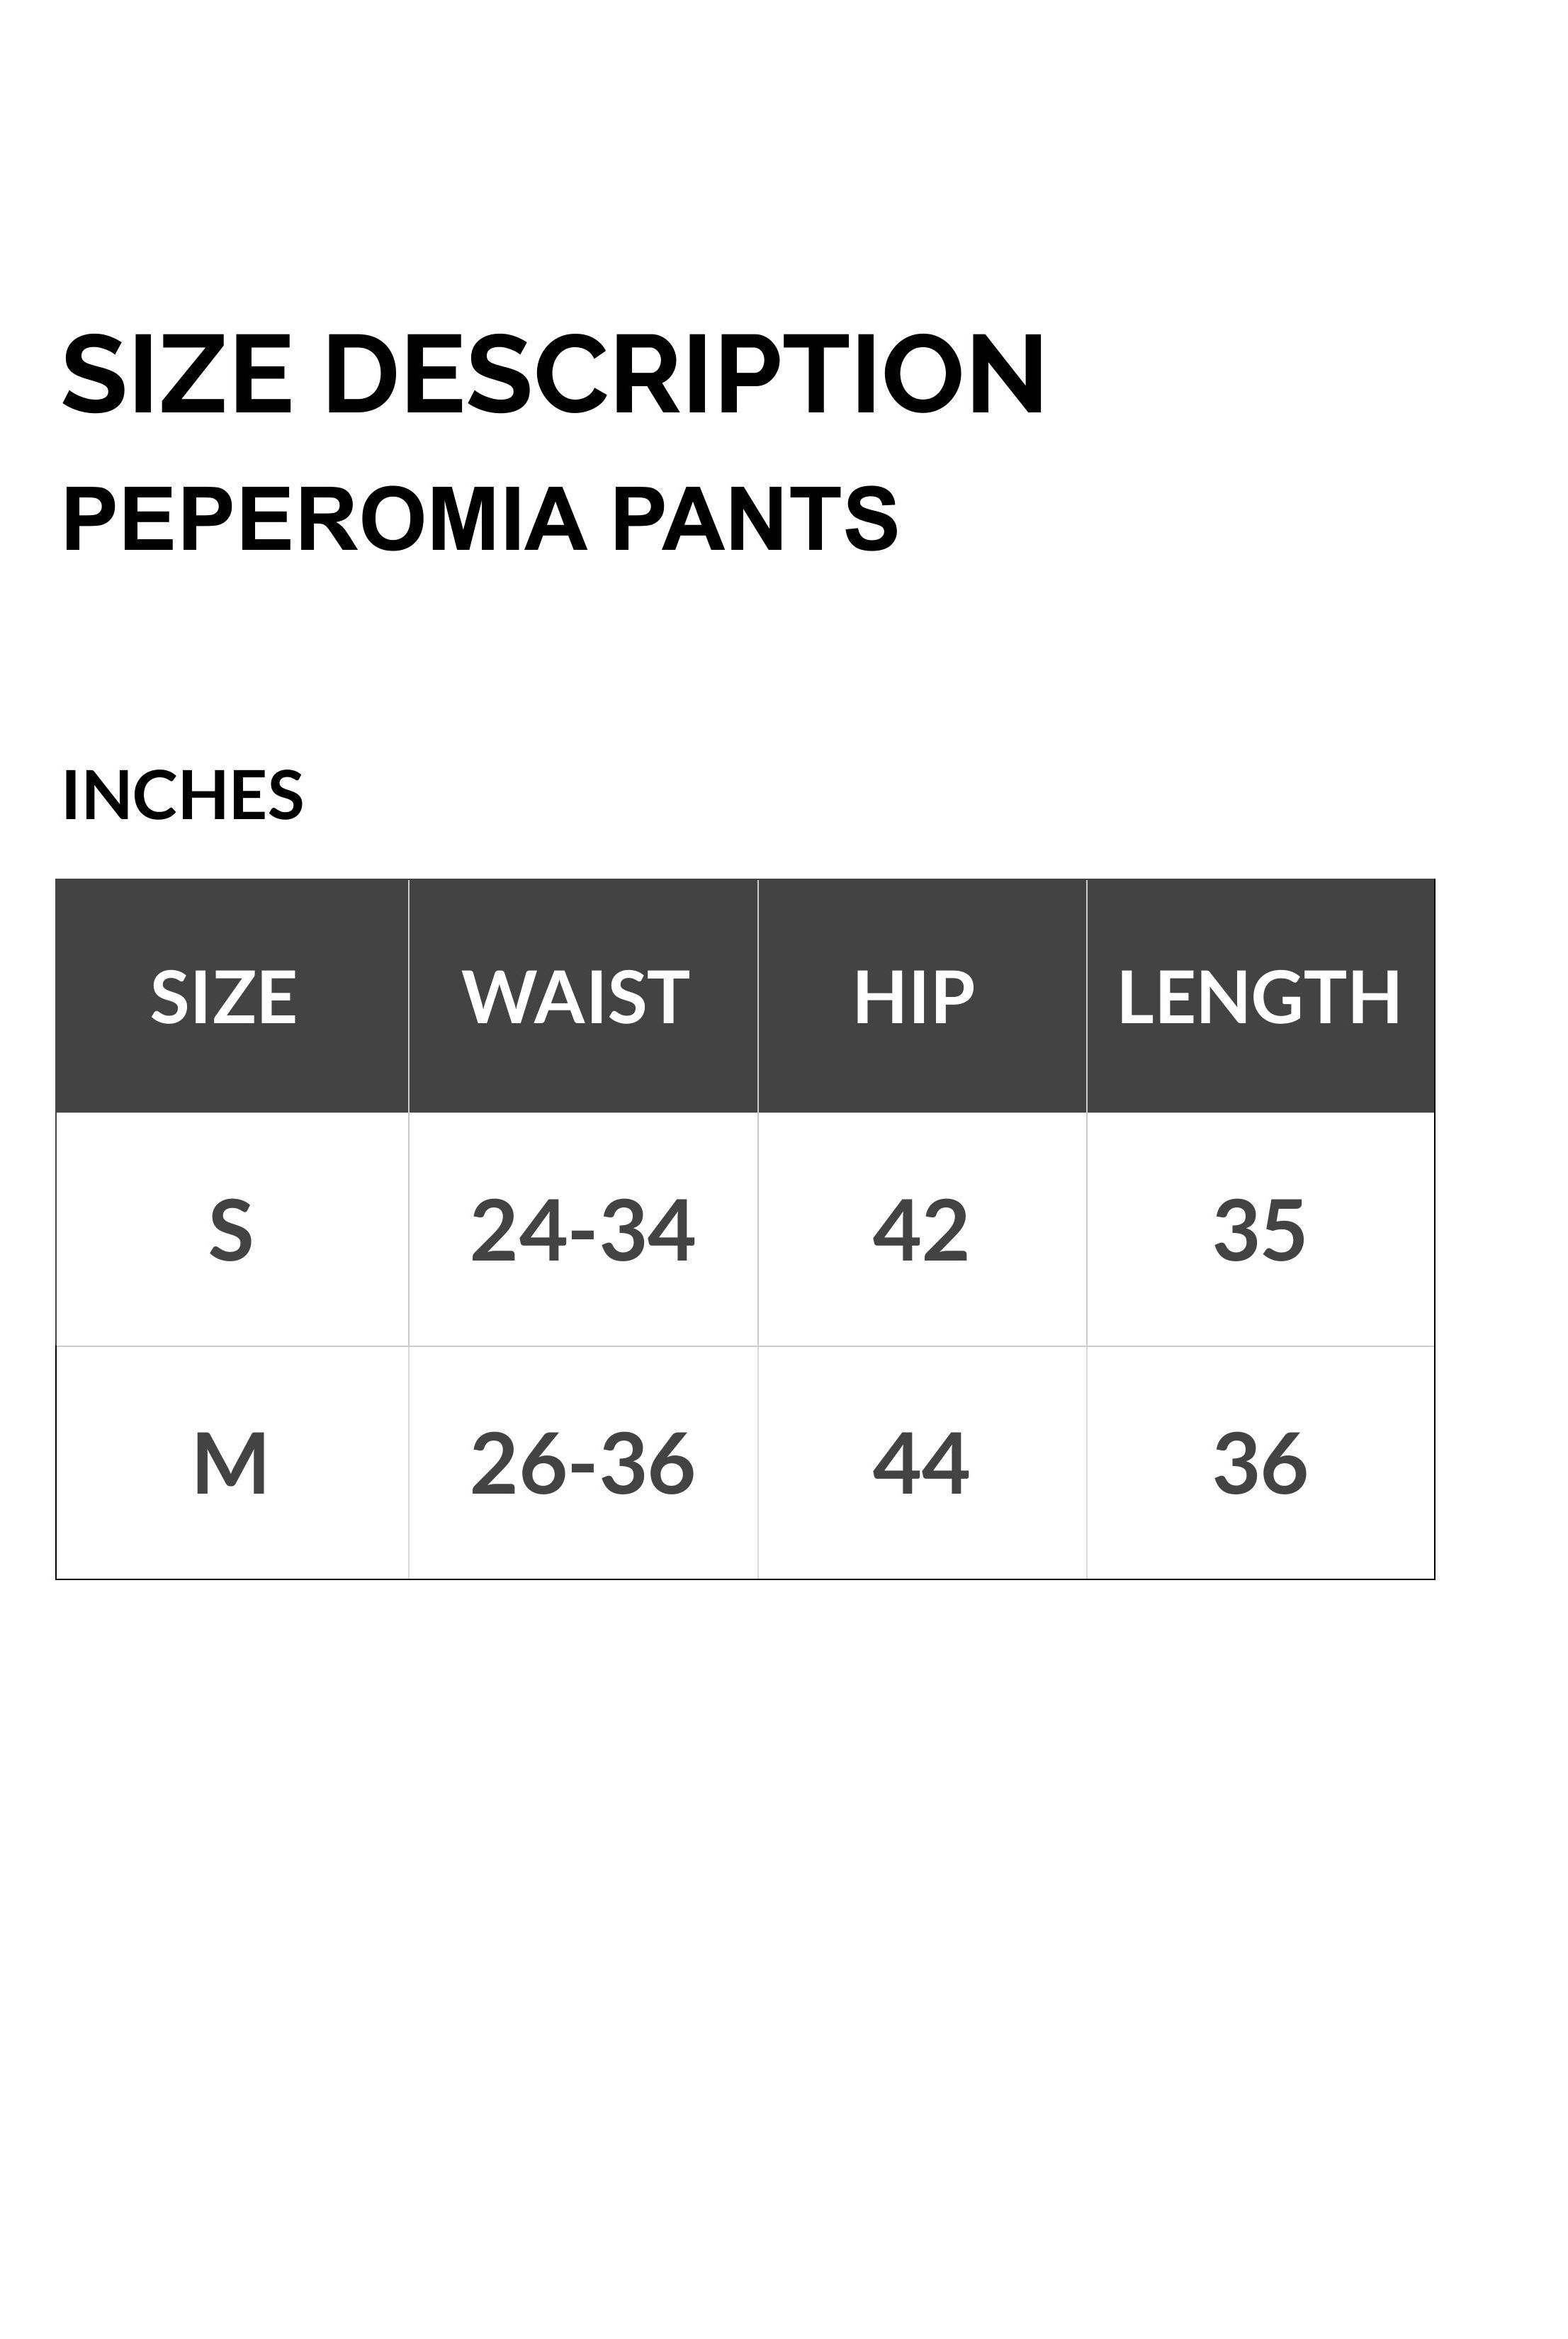 SIZES RELAXED FIT PANTS